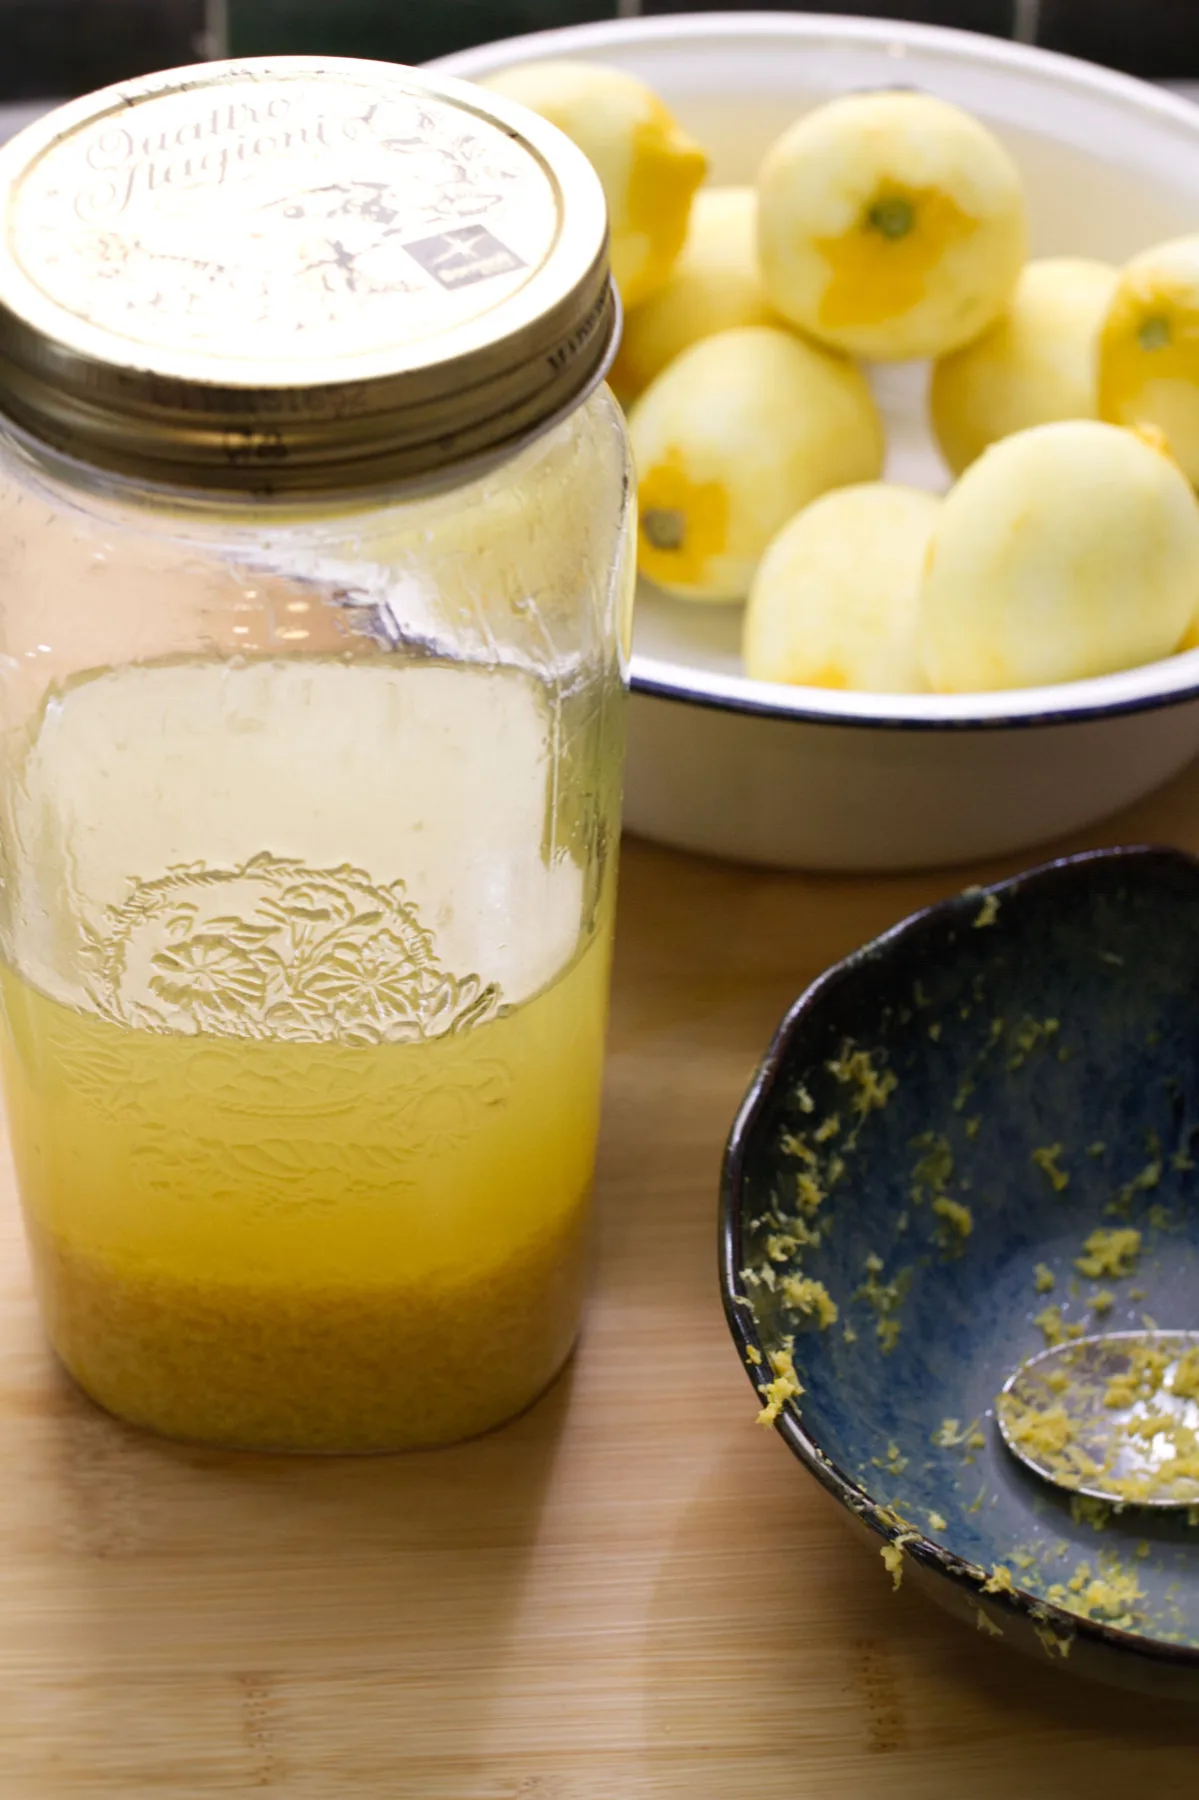 Zest from fresh lemons is added to a jar with Vodka.